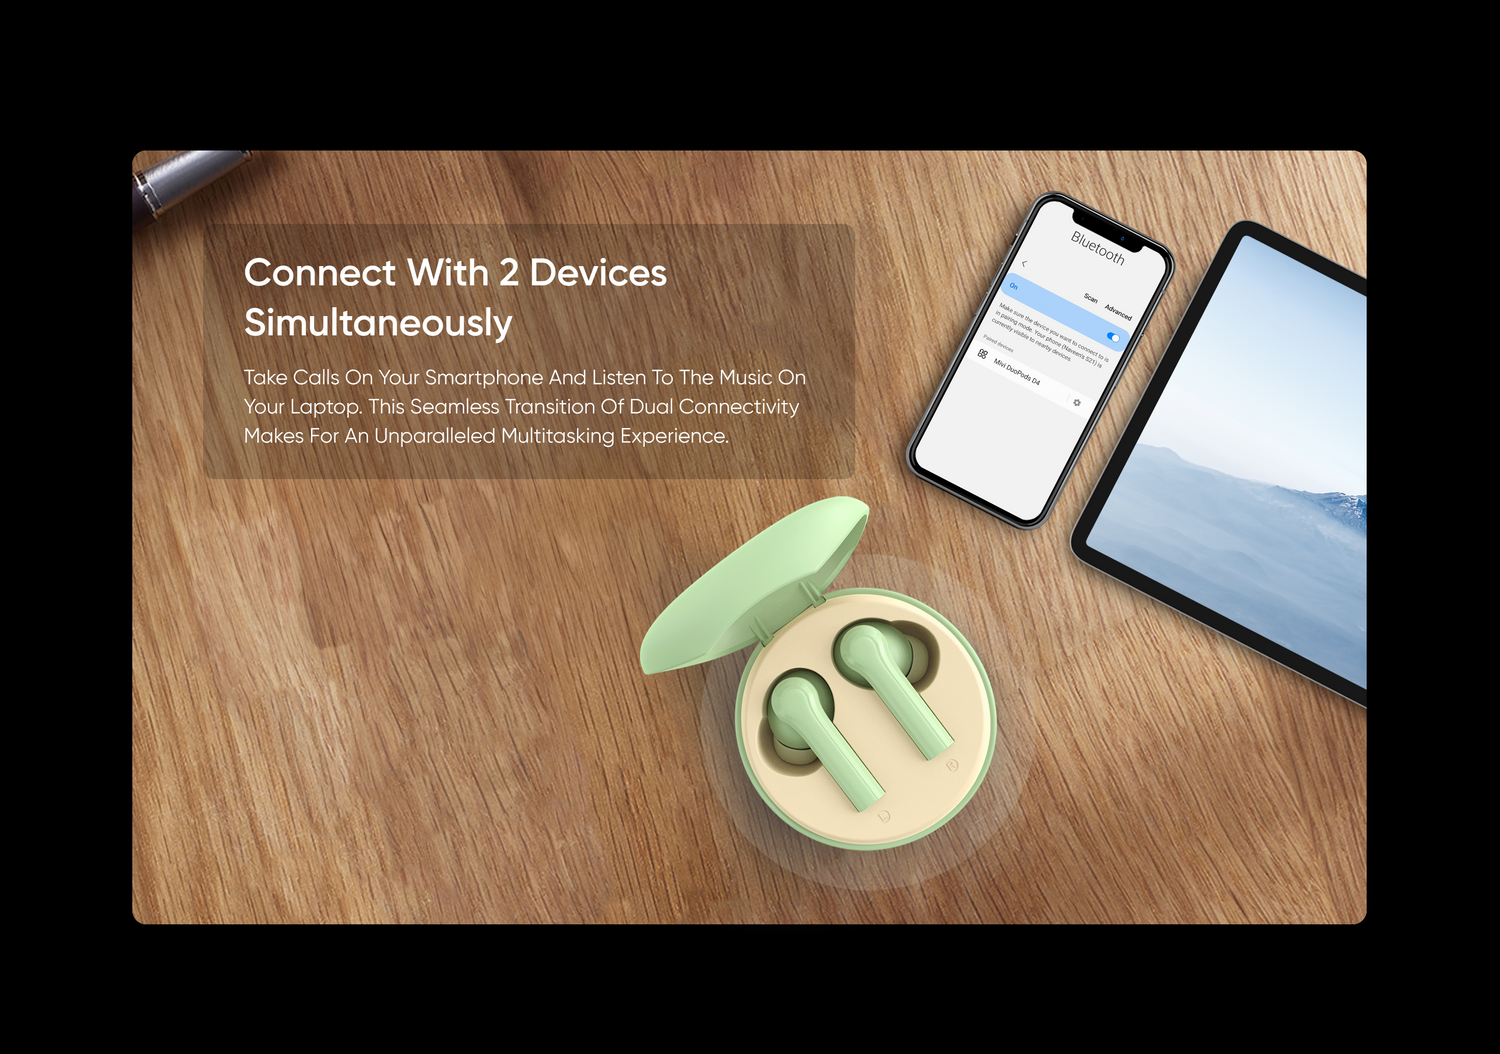 Connect With 2 Devices
Simultaneously
Take Calls On Your Smartphone And Listen To The Music On
Your Laptop. This Seamless Transition Of Dual Connectivity
Makes For An Unparalleled Multitasking Experience.